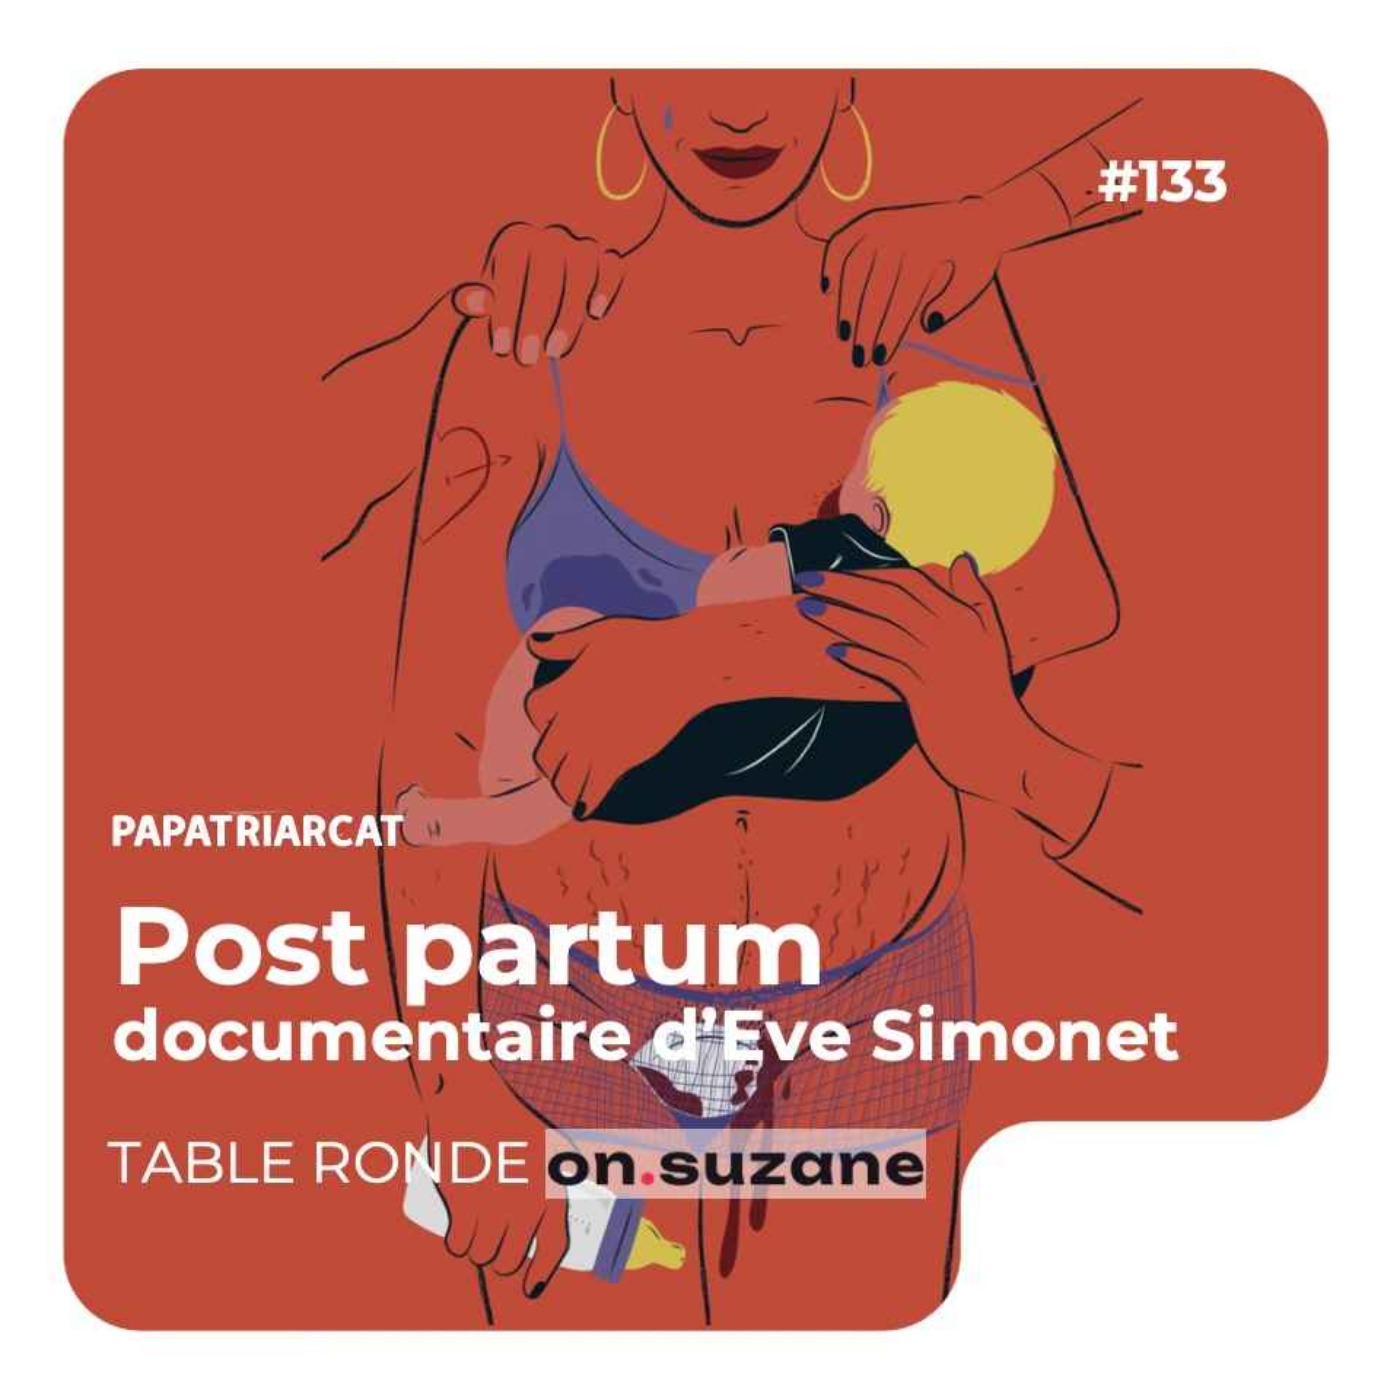 cover art for #133 - Post partum - Table ronde   